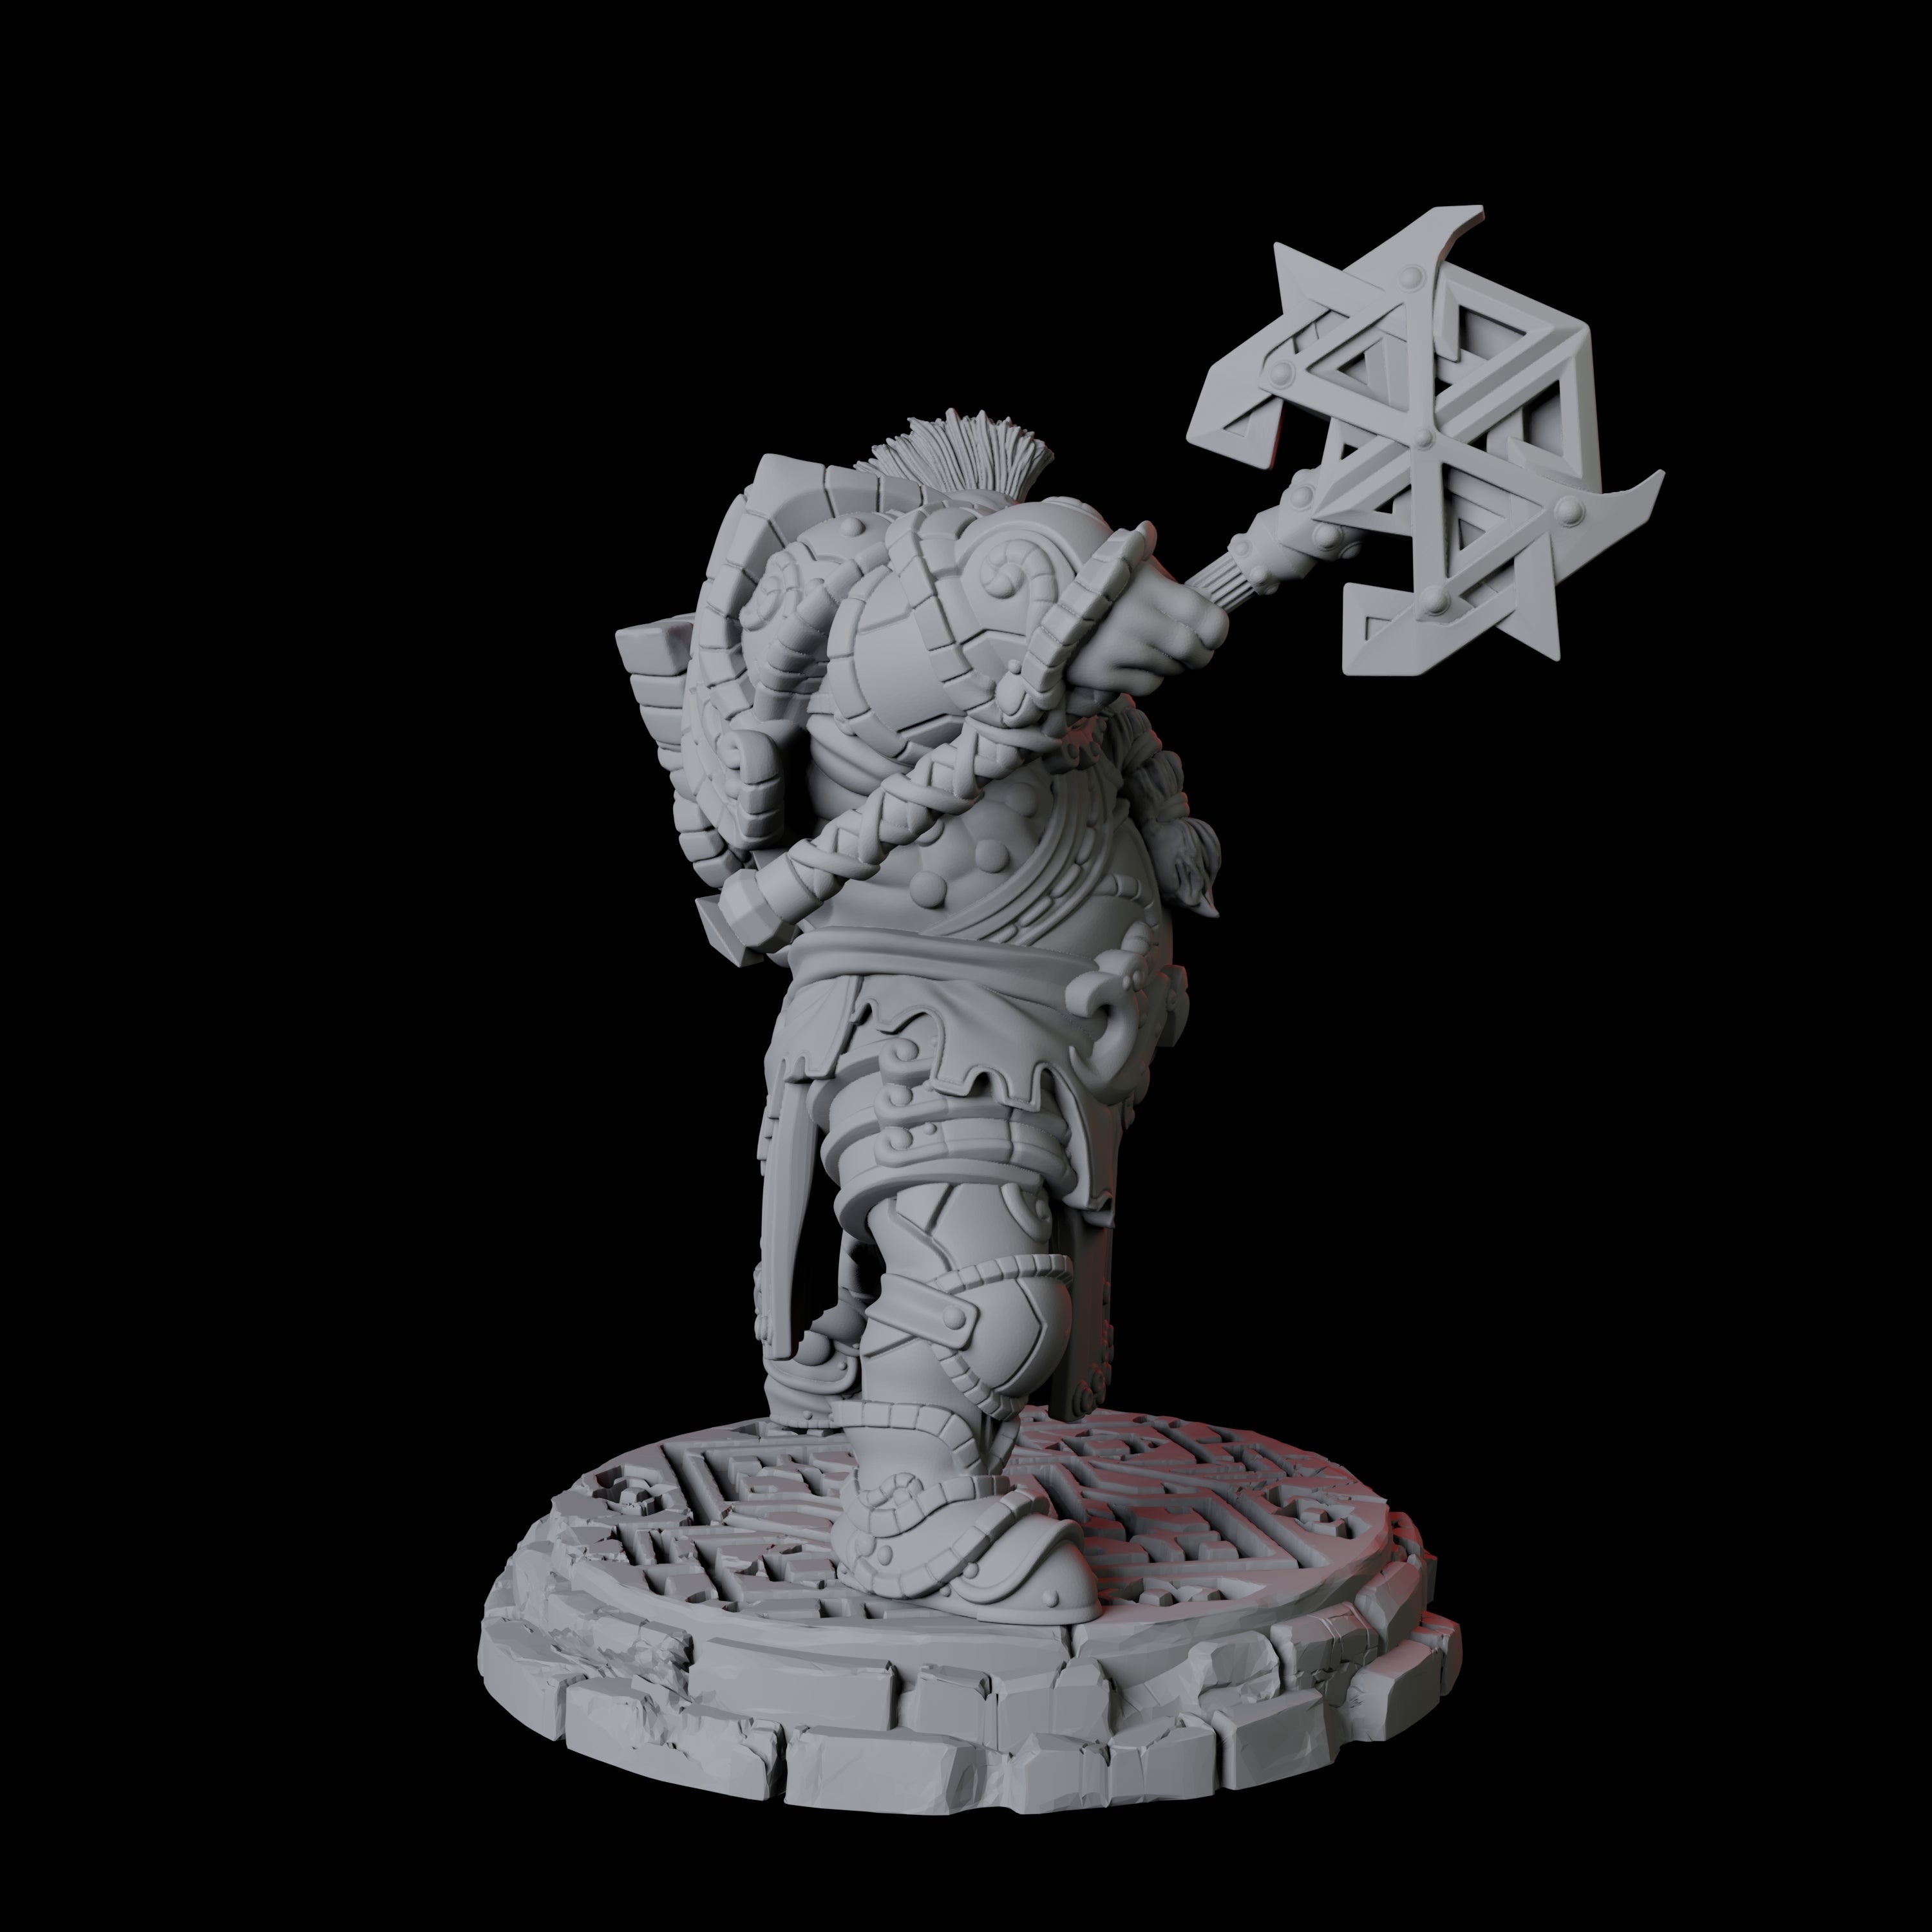 Heavy Armoured Dwarf Warrior E Miniature for Dungeons and Dragons, Pathfinder or other TTRPGs